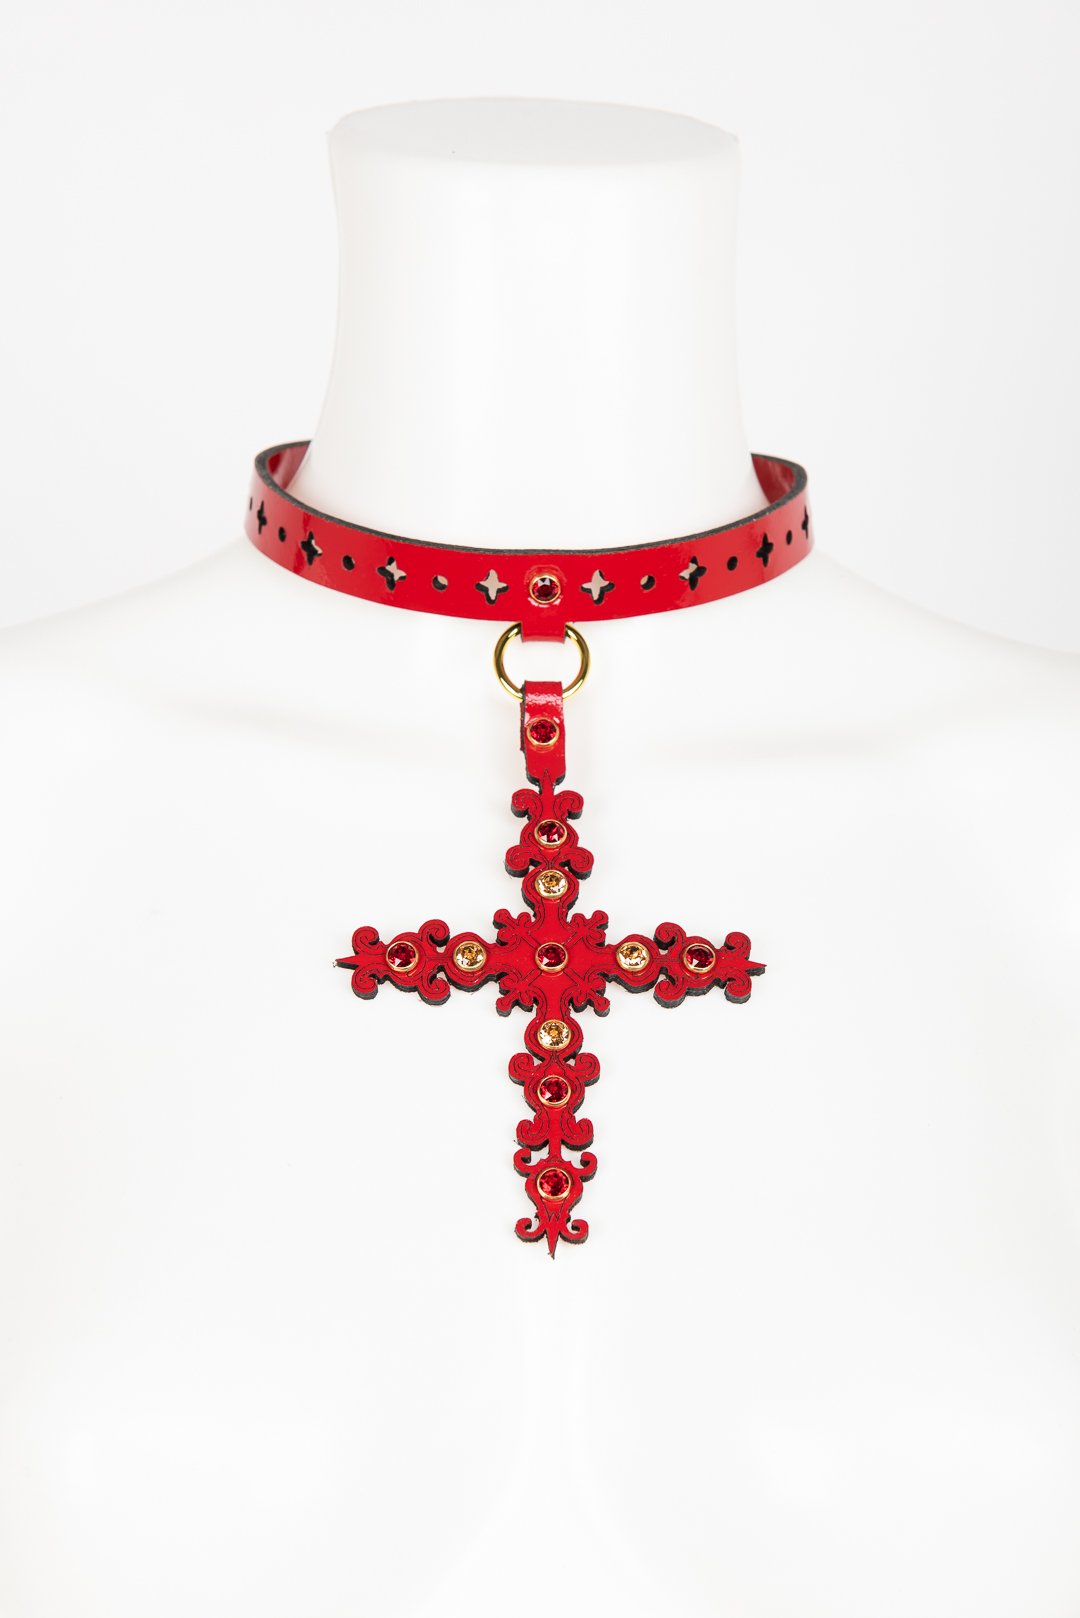 Luxury Patent Leather Cross Choker Buy Online at Fraulein Kink